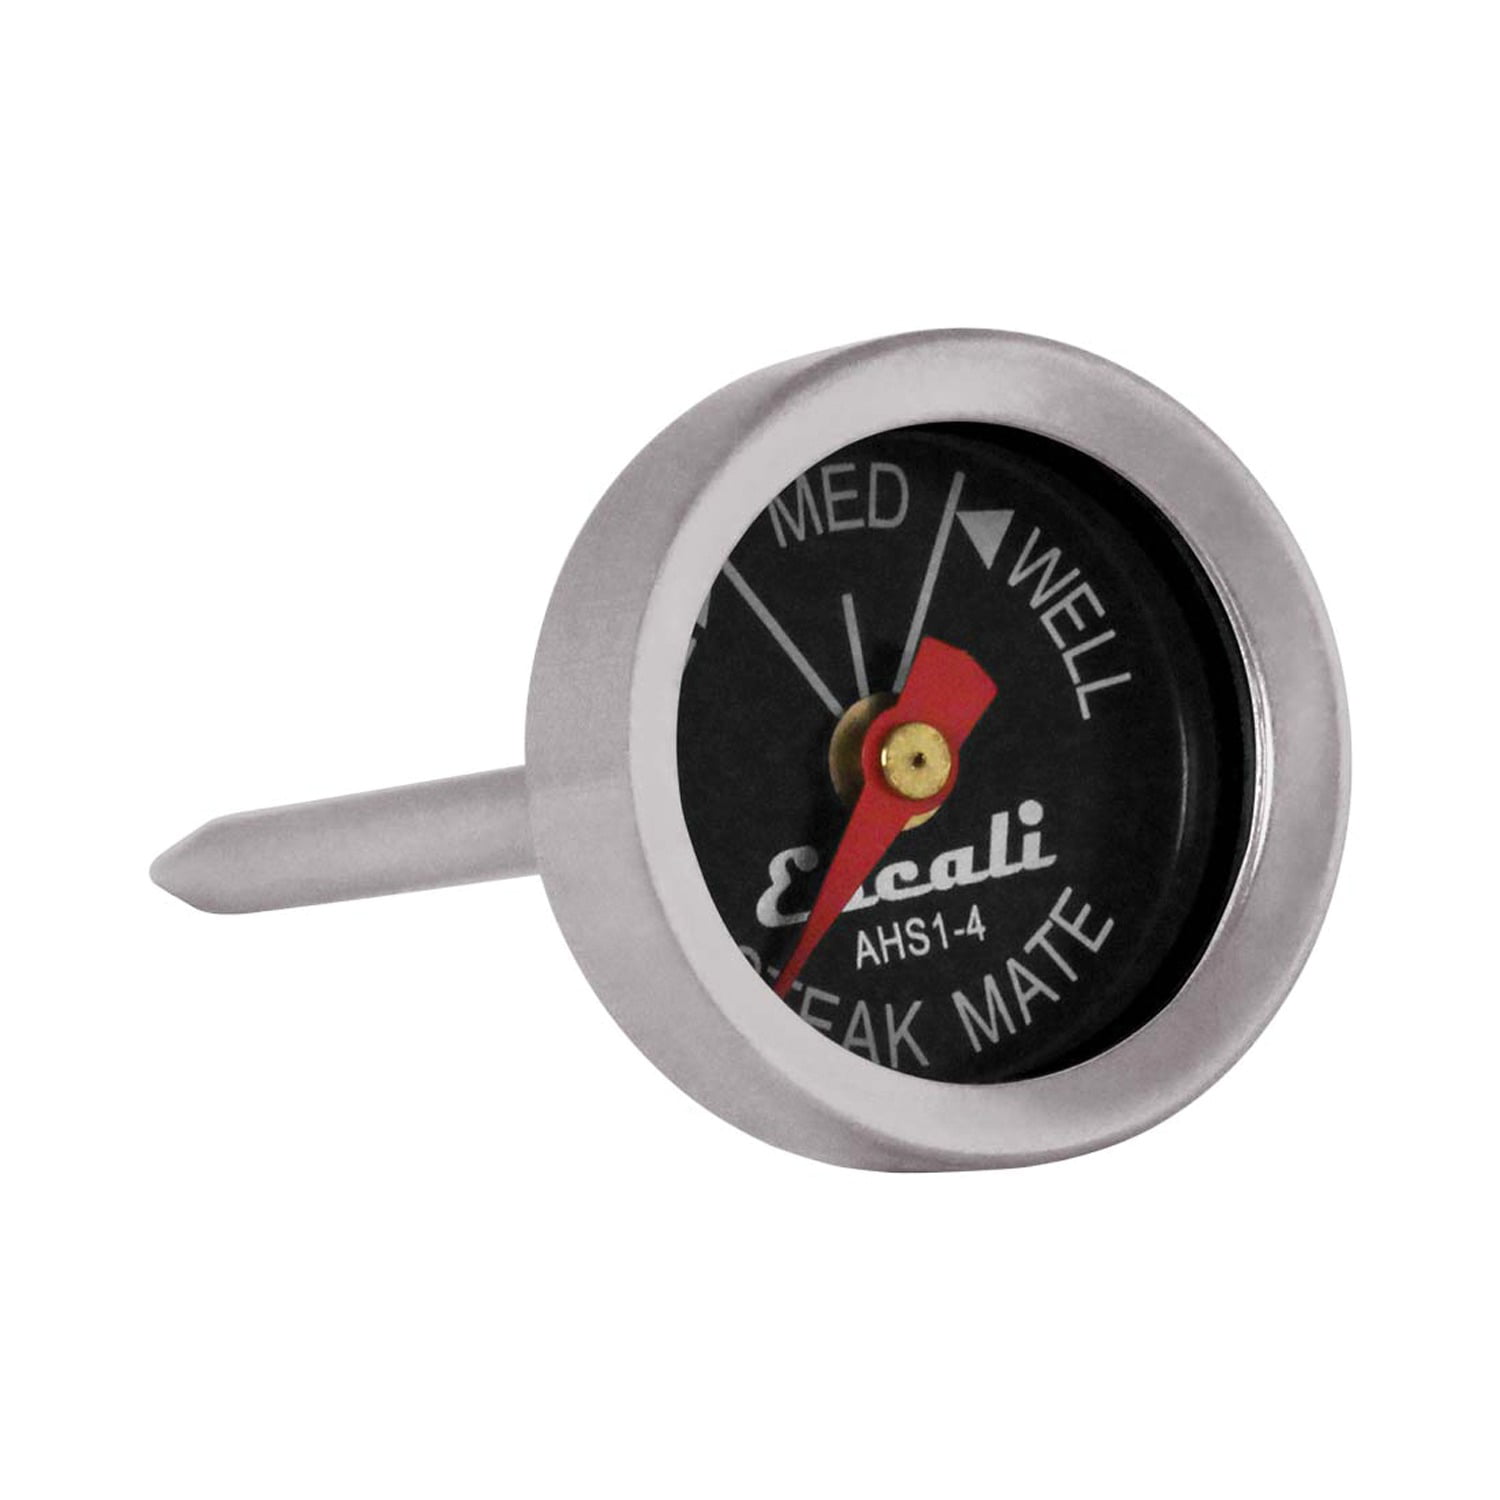 Escali Oven Safe Meat Thermometer 0 F 17.8 C to 220 F 104.4 C Easy